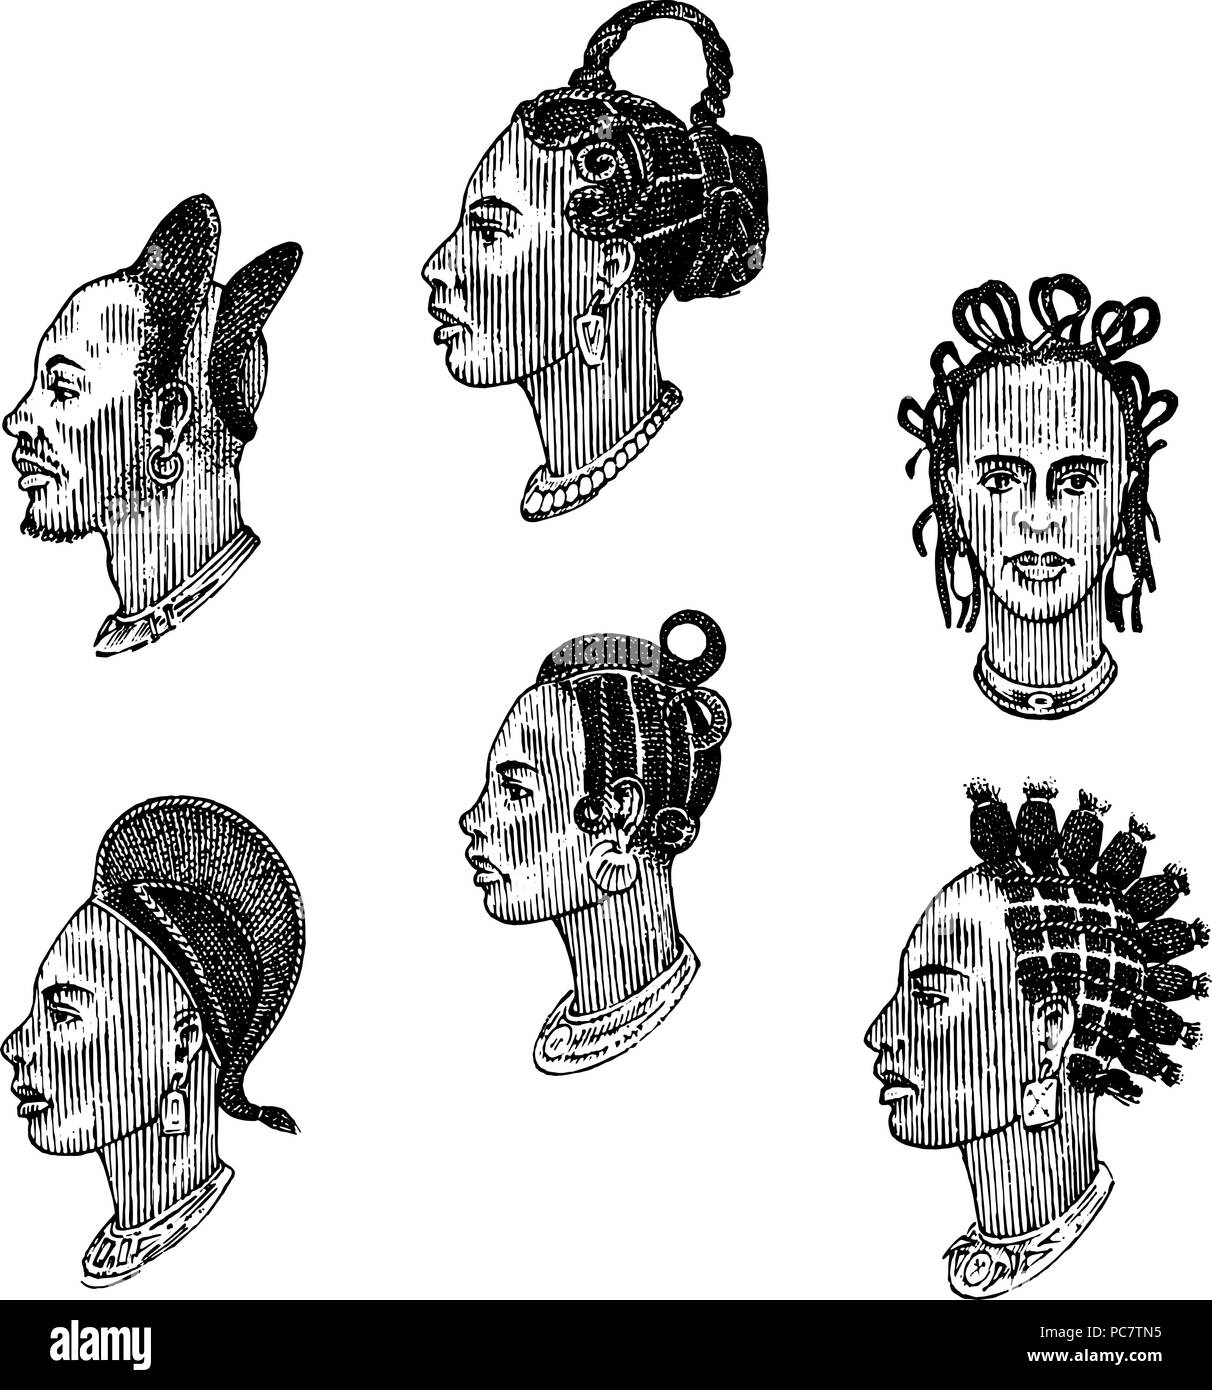 African national male hairstyles. Profile of a man with curly hair. Different Afro Dreadlocks. Ancient faces of people. Portrait Engraved hand drawn old sketch. Southern tribes. Stock Vector